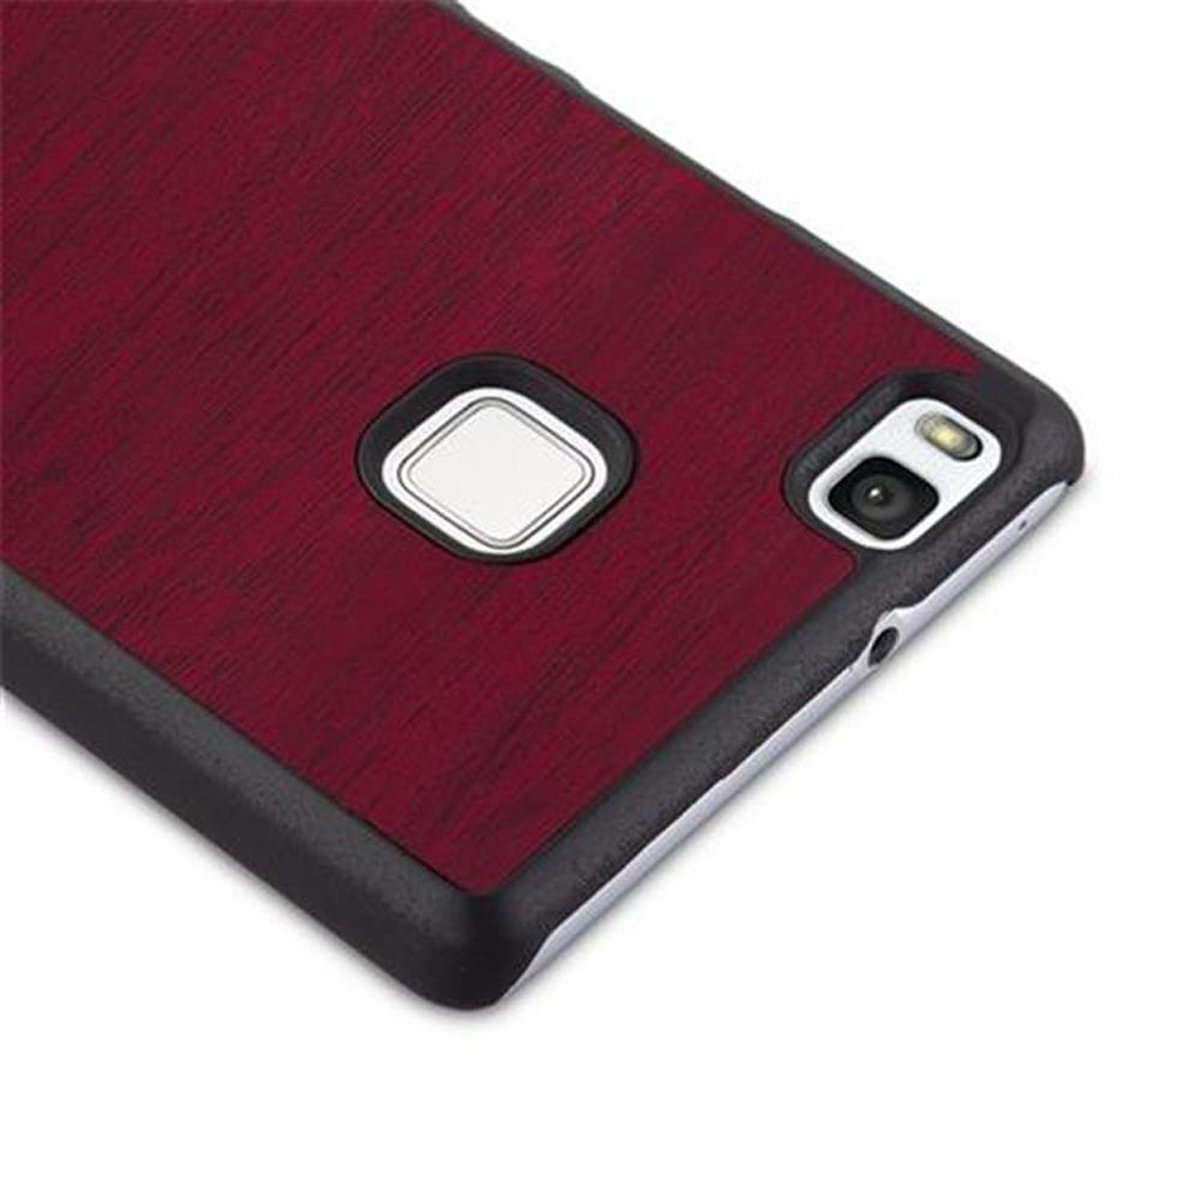 LITE, G9 WOODY Backcover, Huawei, Style, LITE Hard Hülle CADORABO 2016 / Case P9 Woody ROT